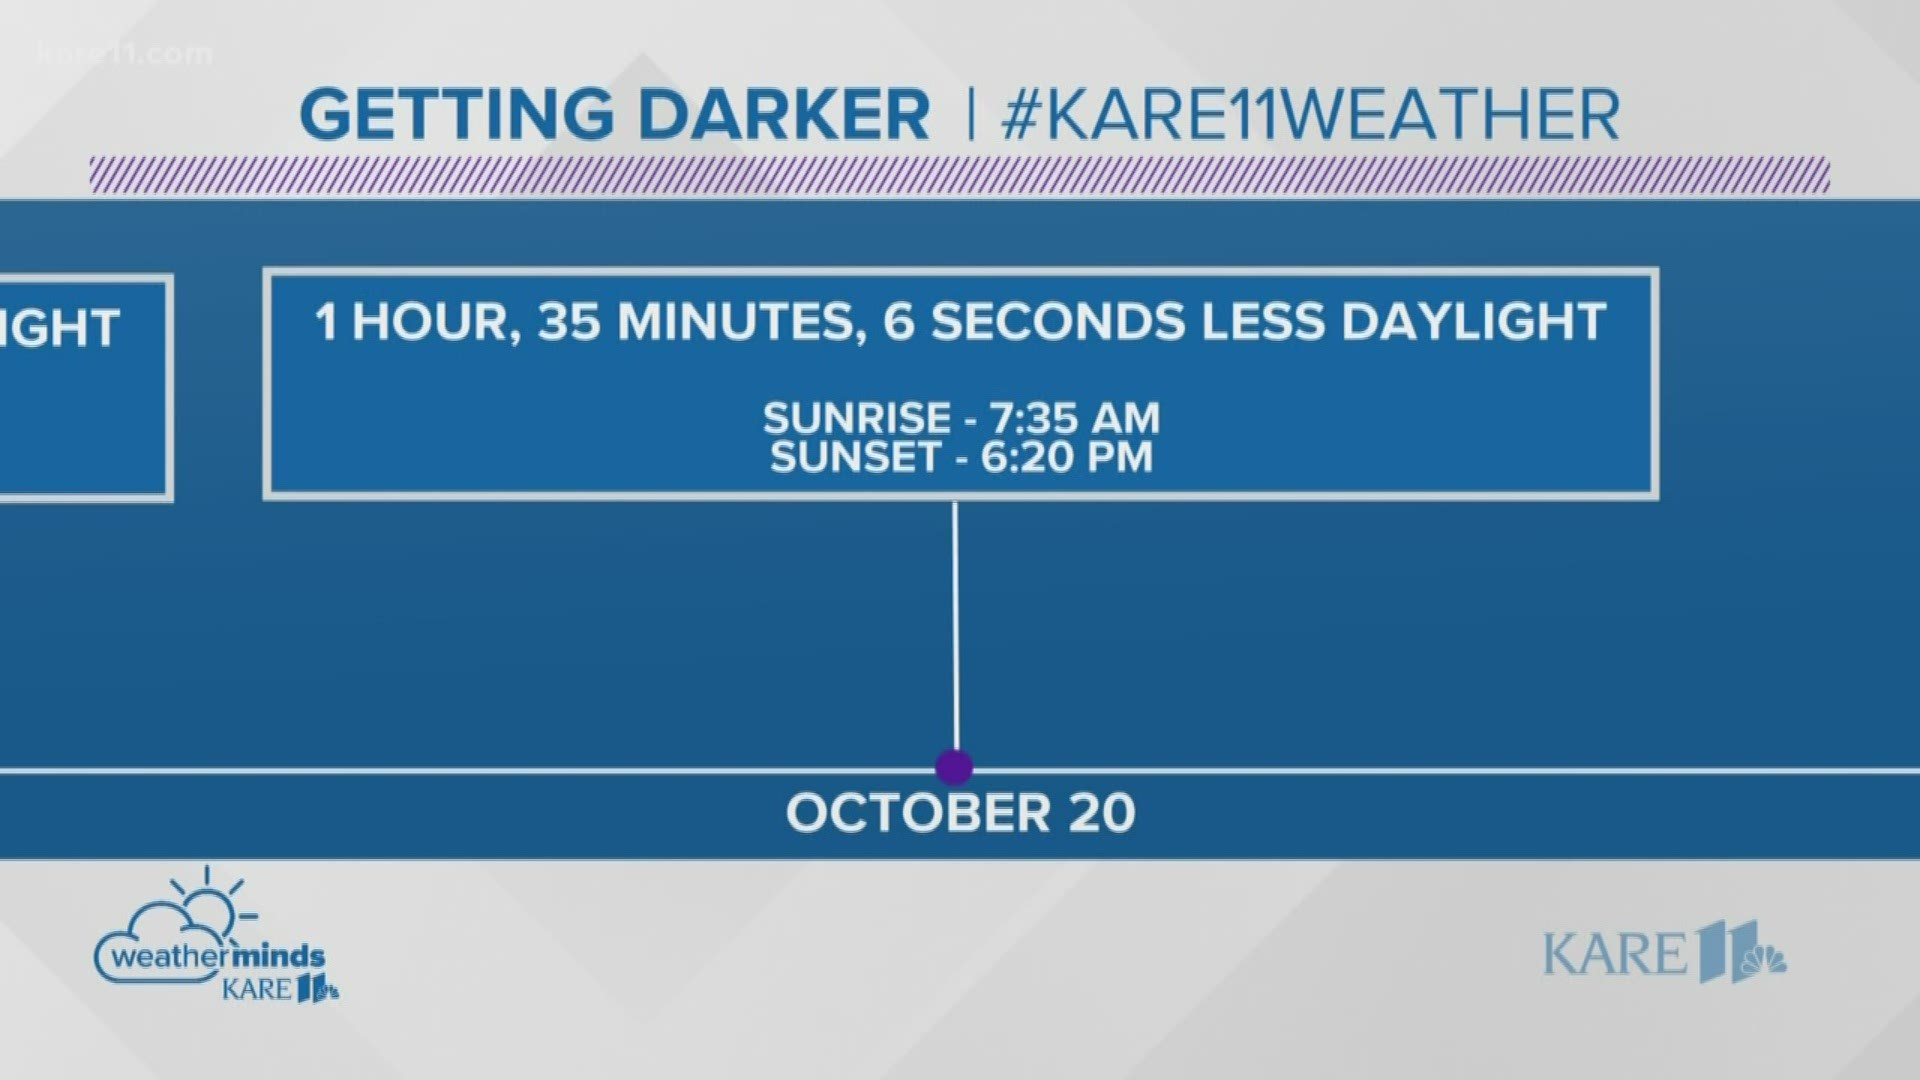 We're well into September and you've likely noticed ... we're not seeing as much daylight.